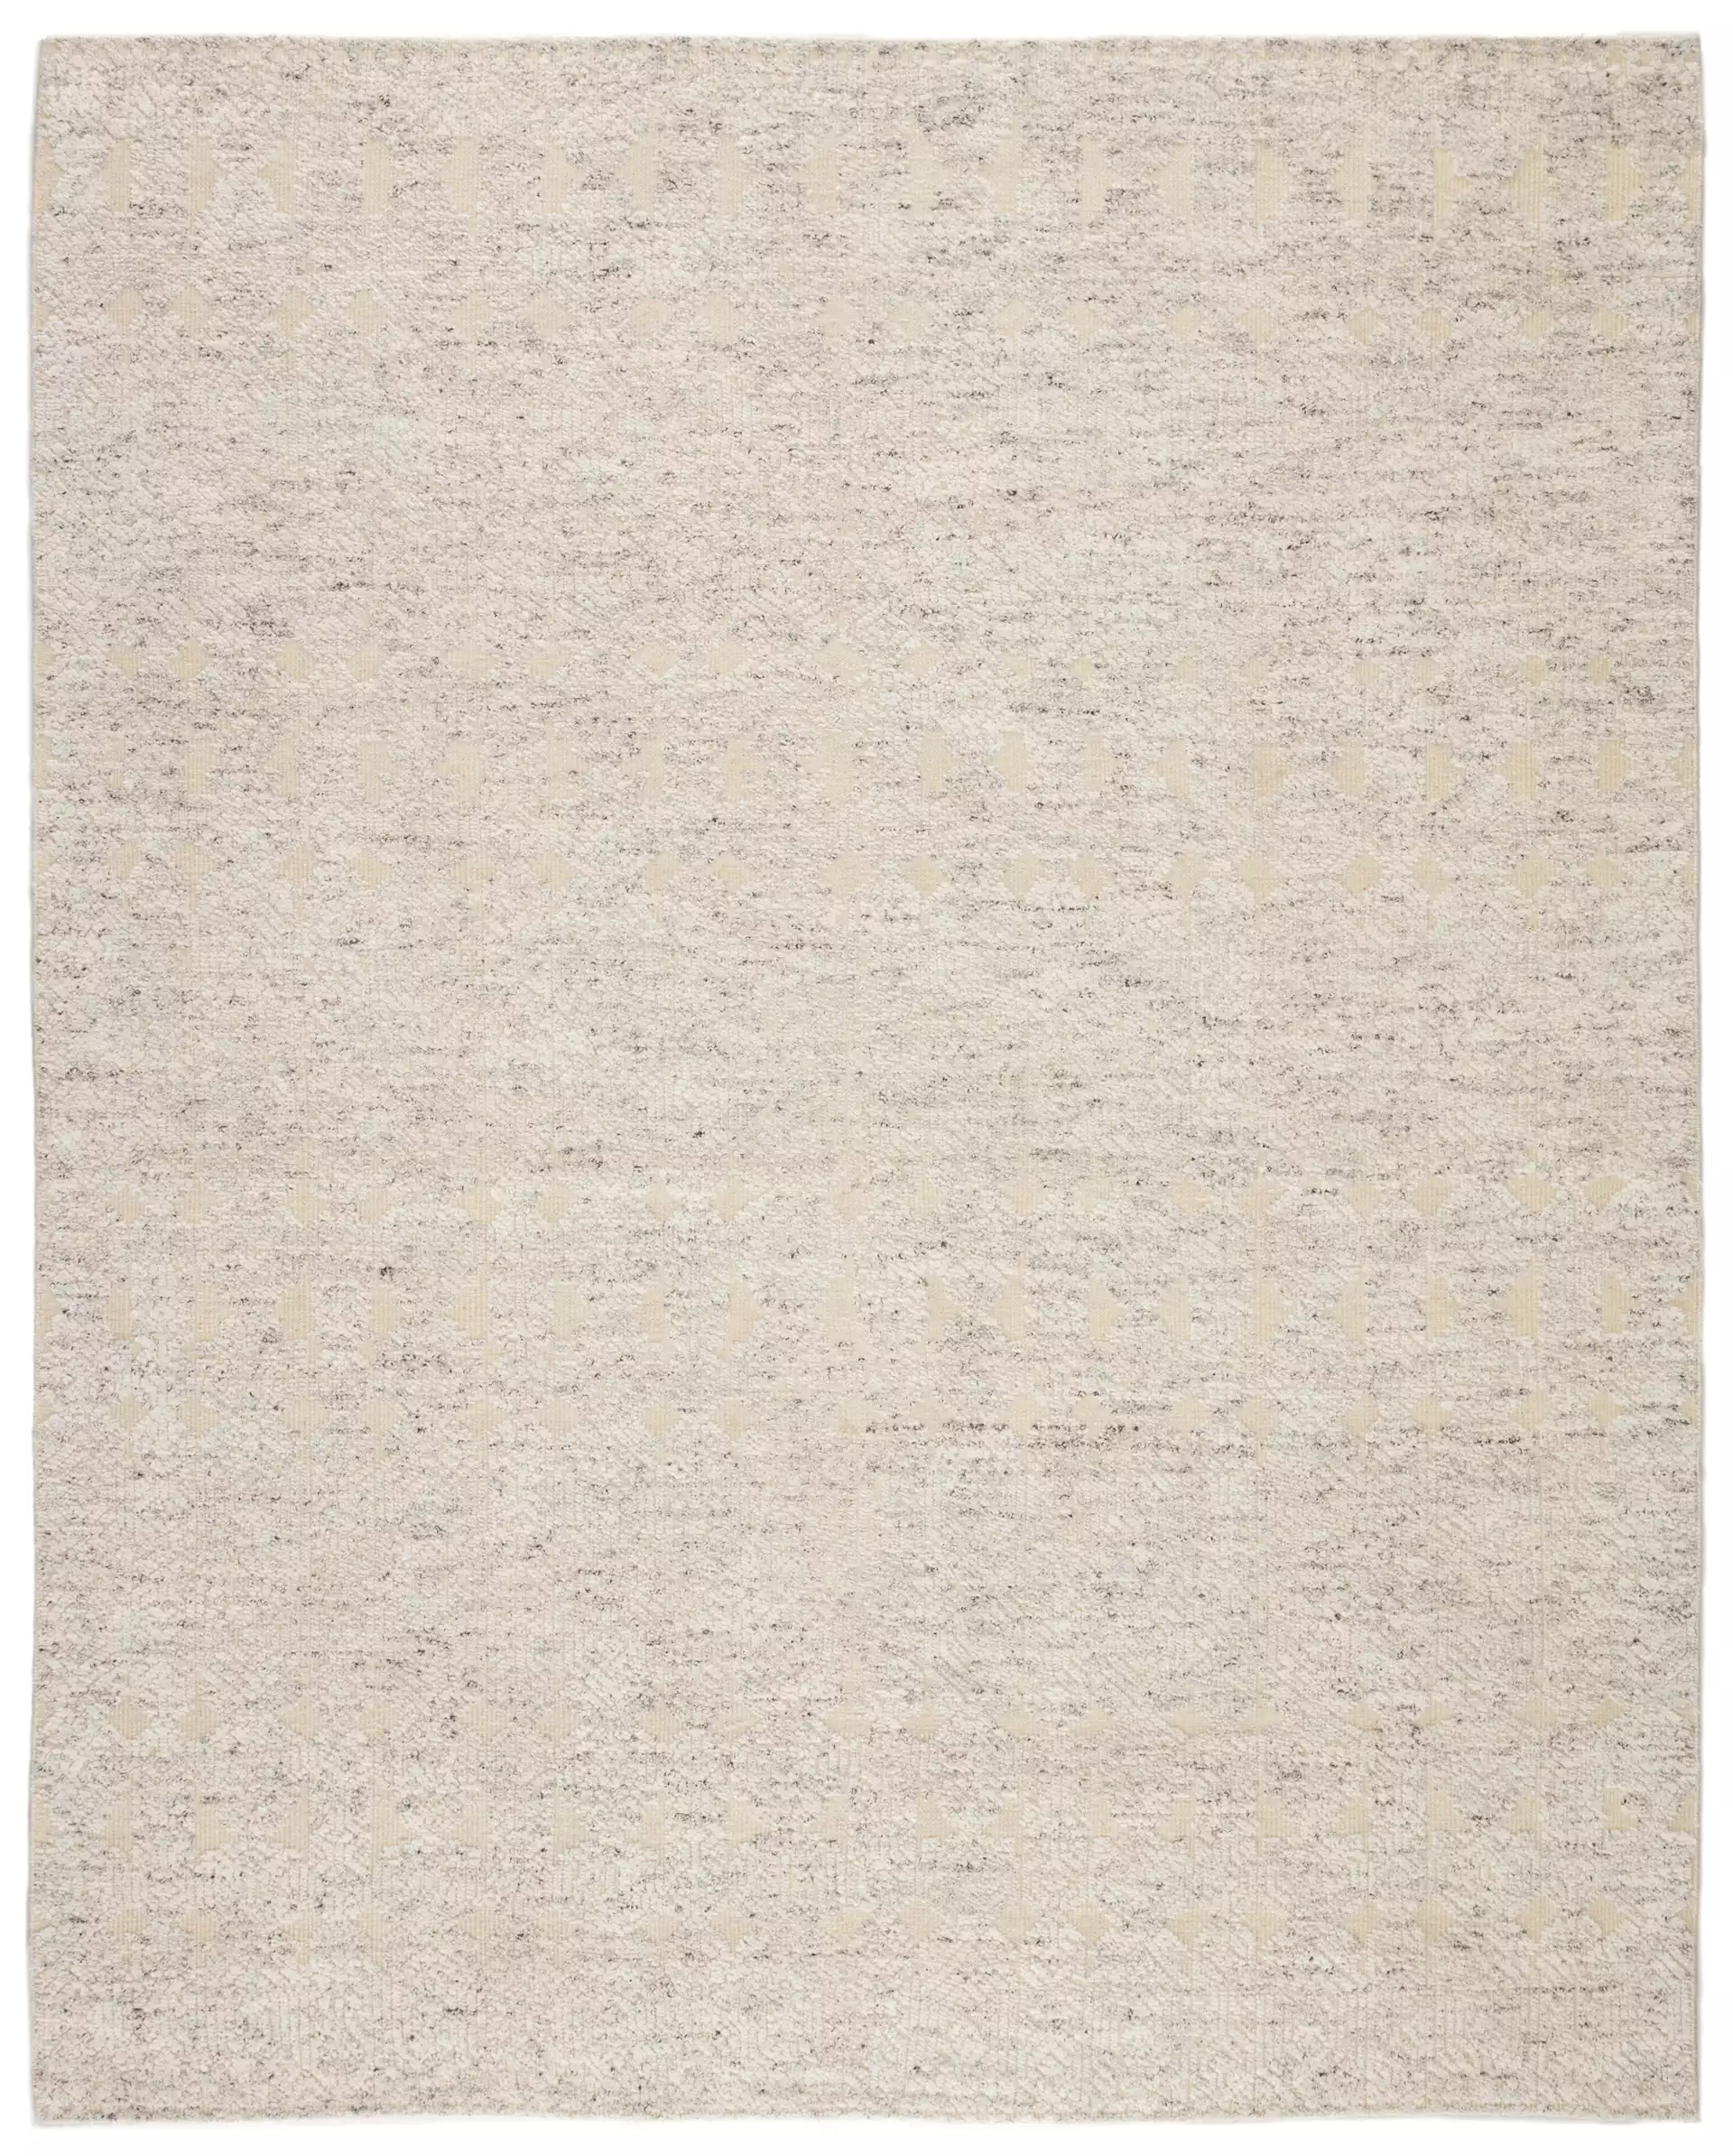 Abelle Hand-Knotted Medallion Gray/ Beige Area Rug (9'X13')